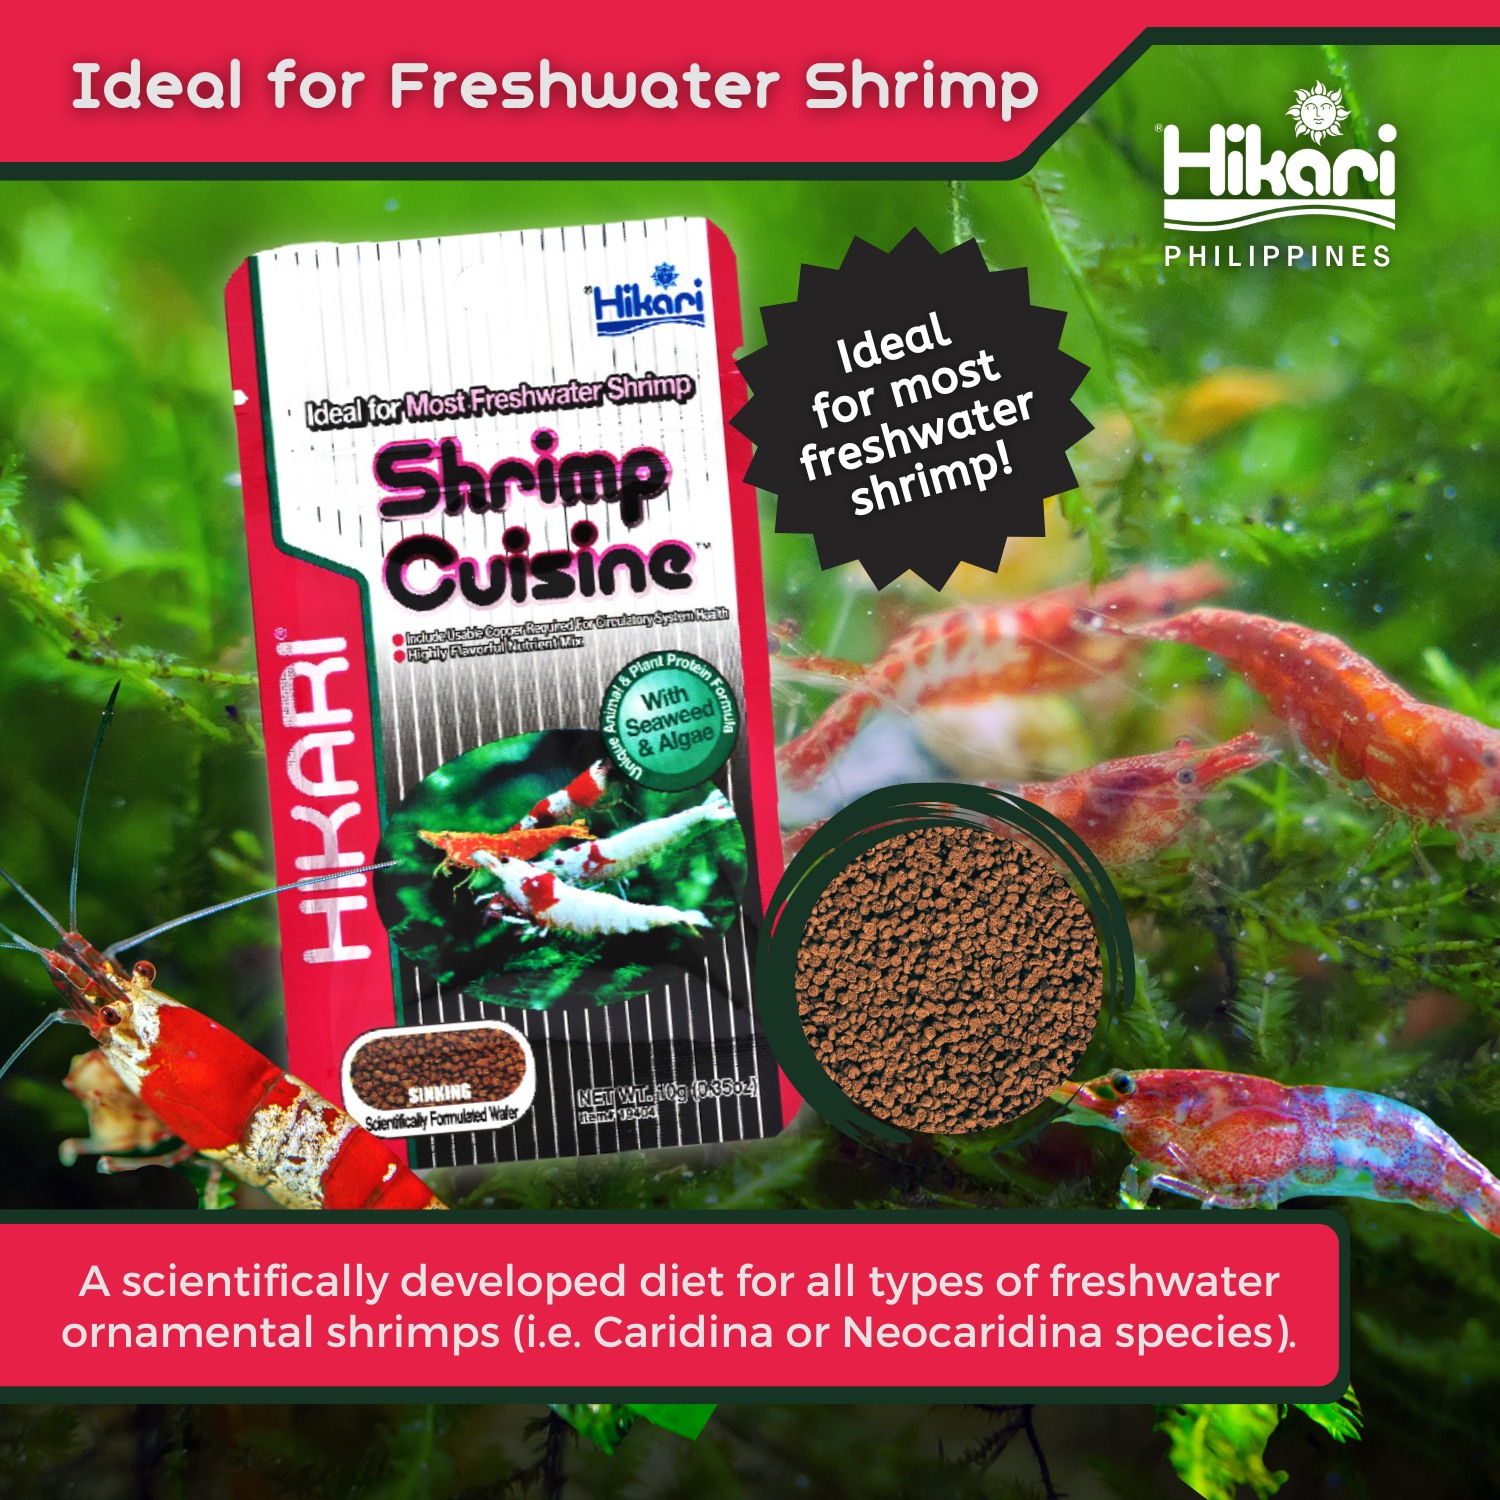 Ideal for fresh water shrimps